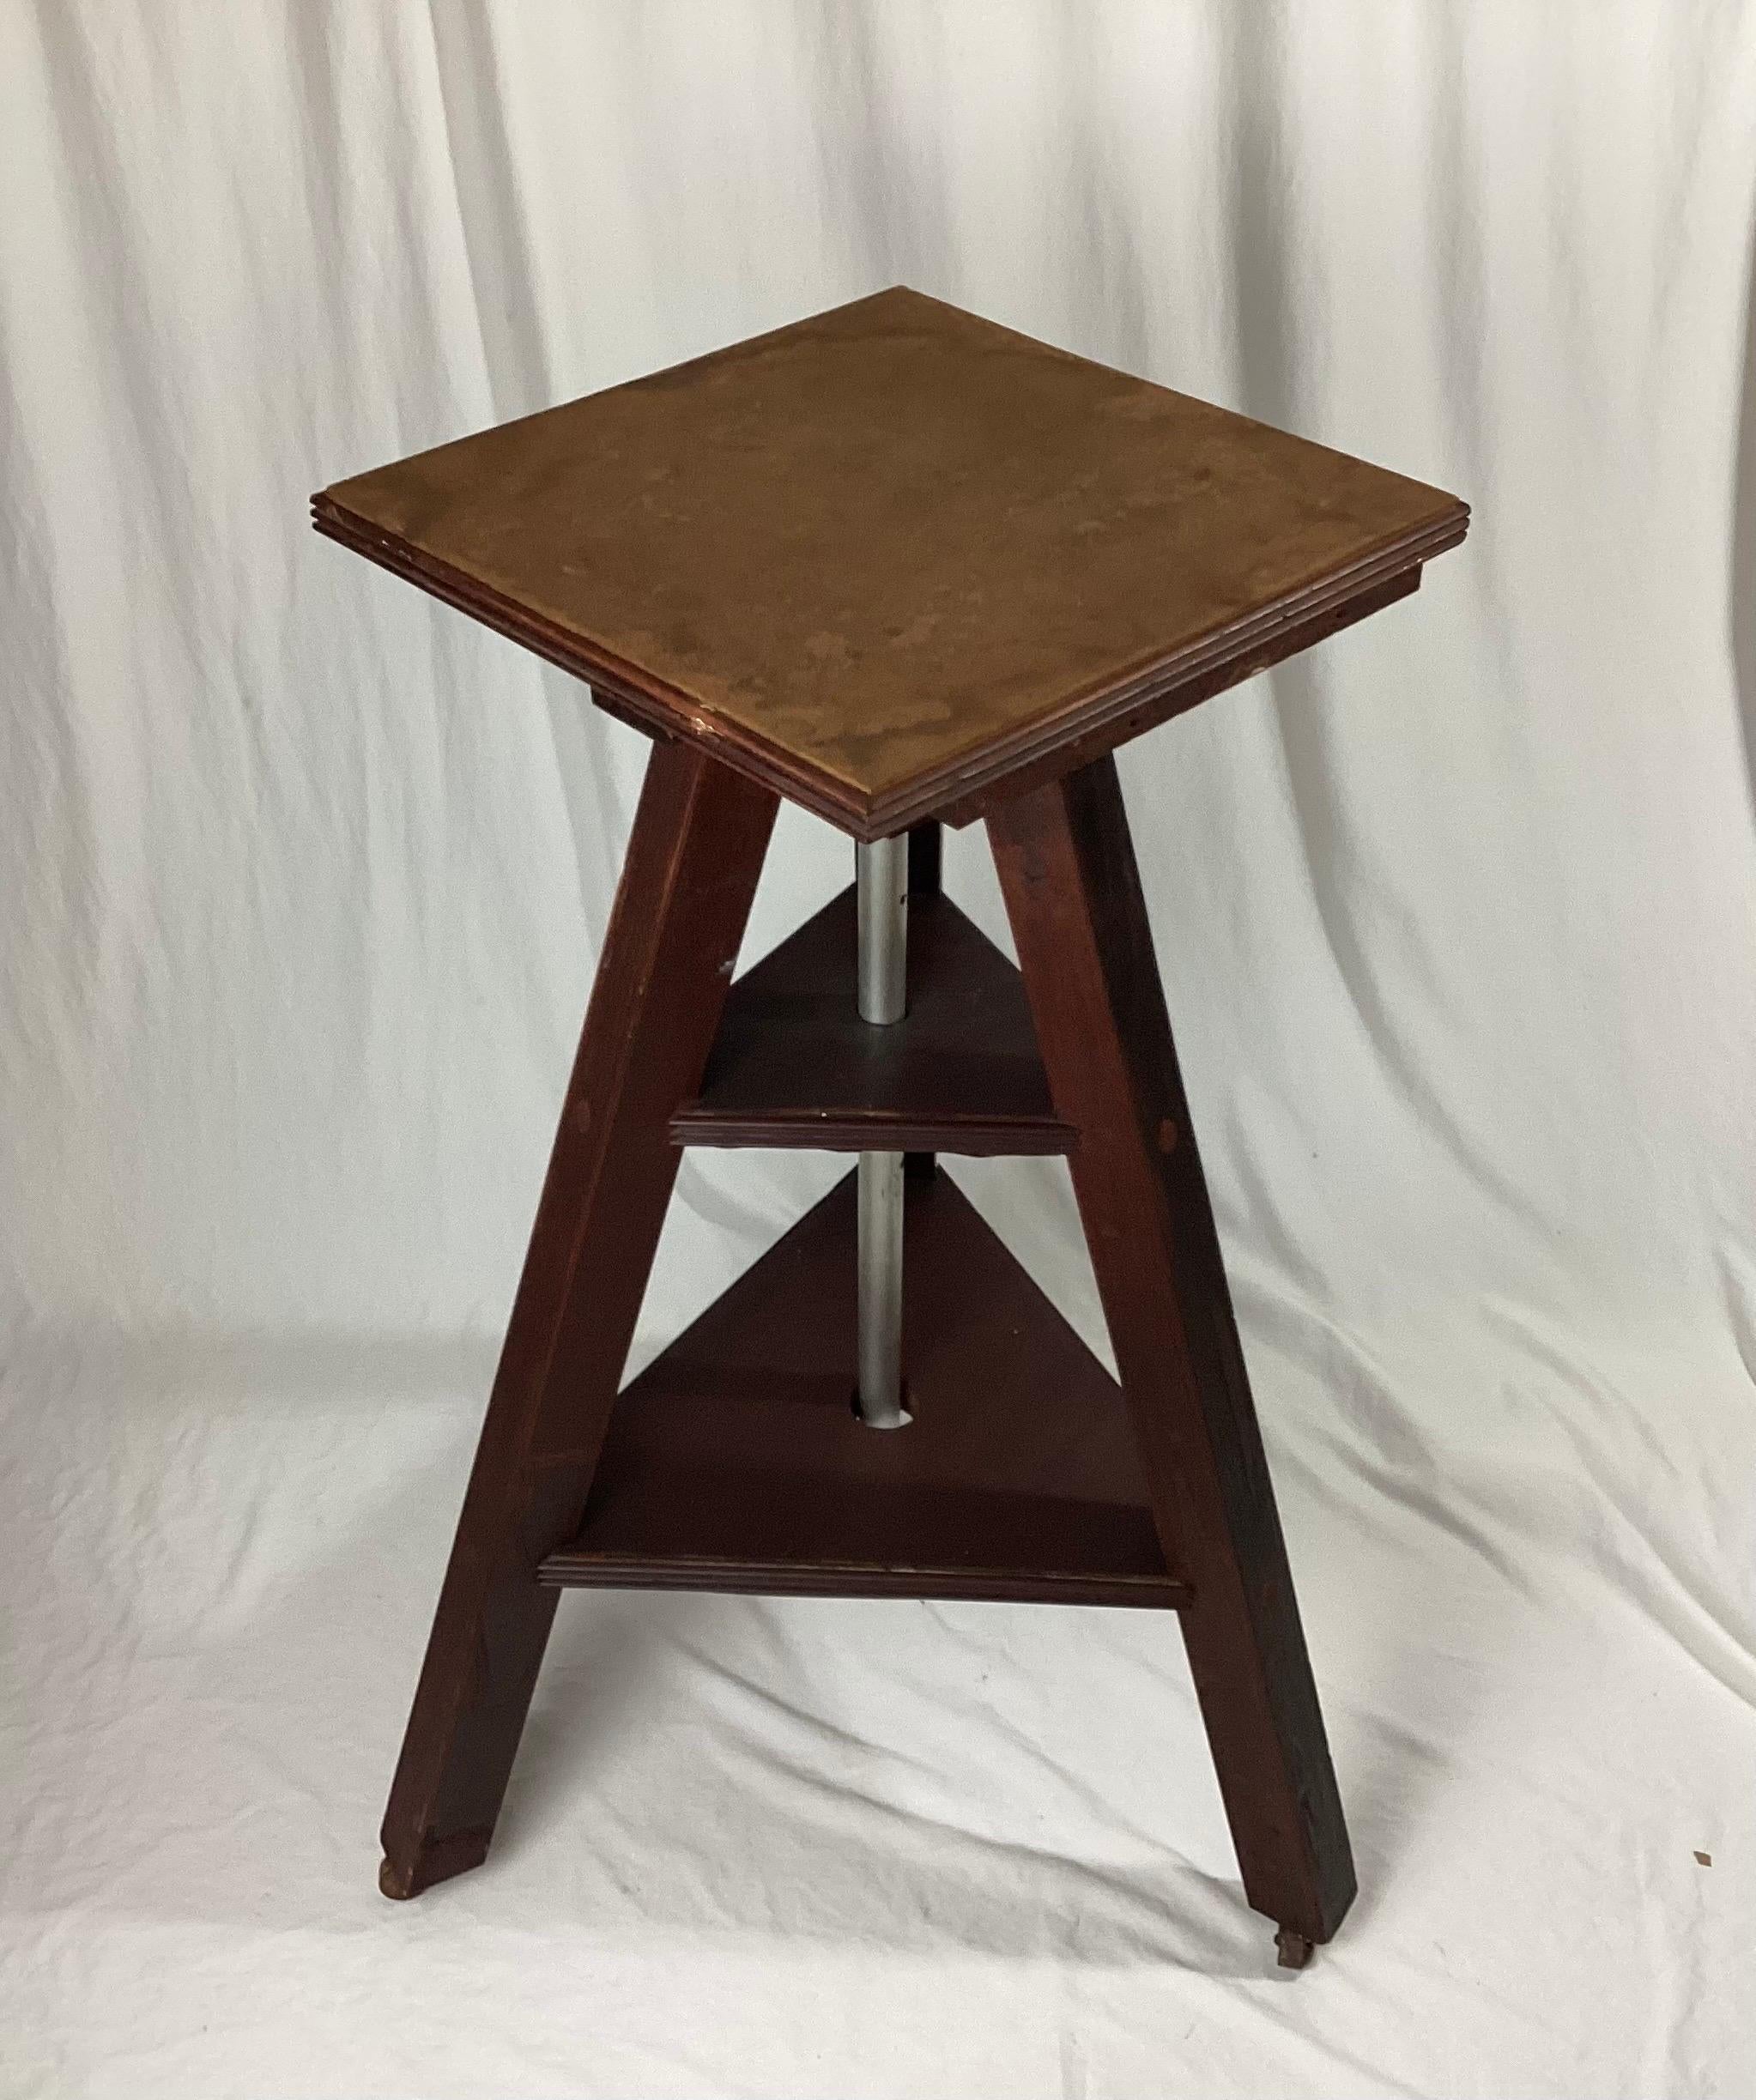 Large oak sculptors studio work easel, sculpture stand. This stand adjusts from 34 1/4